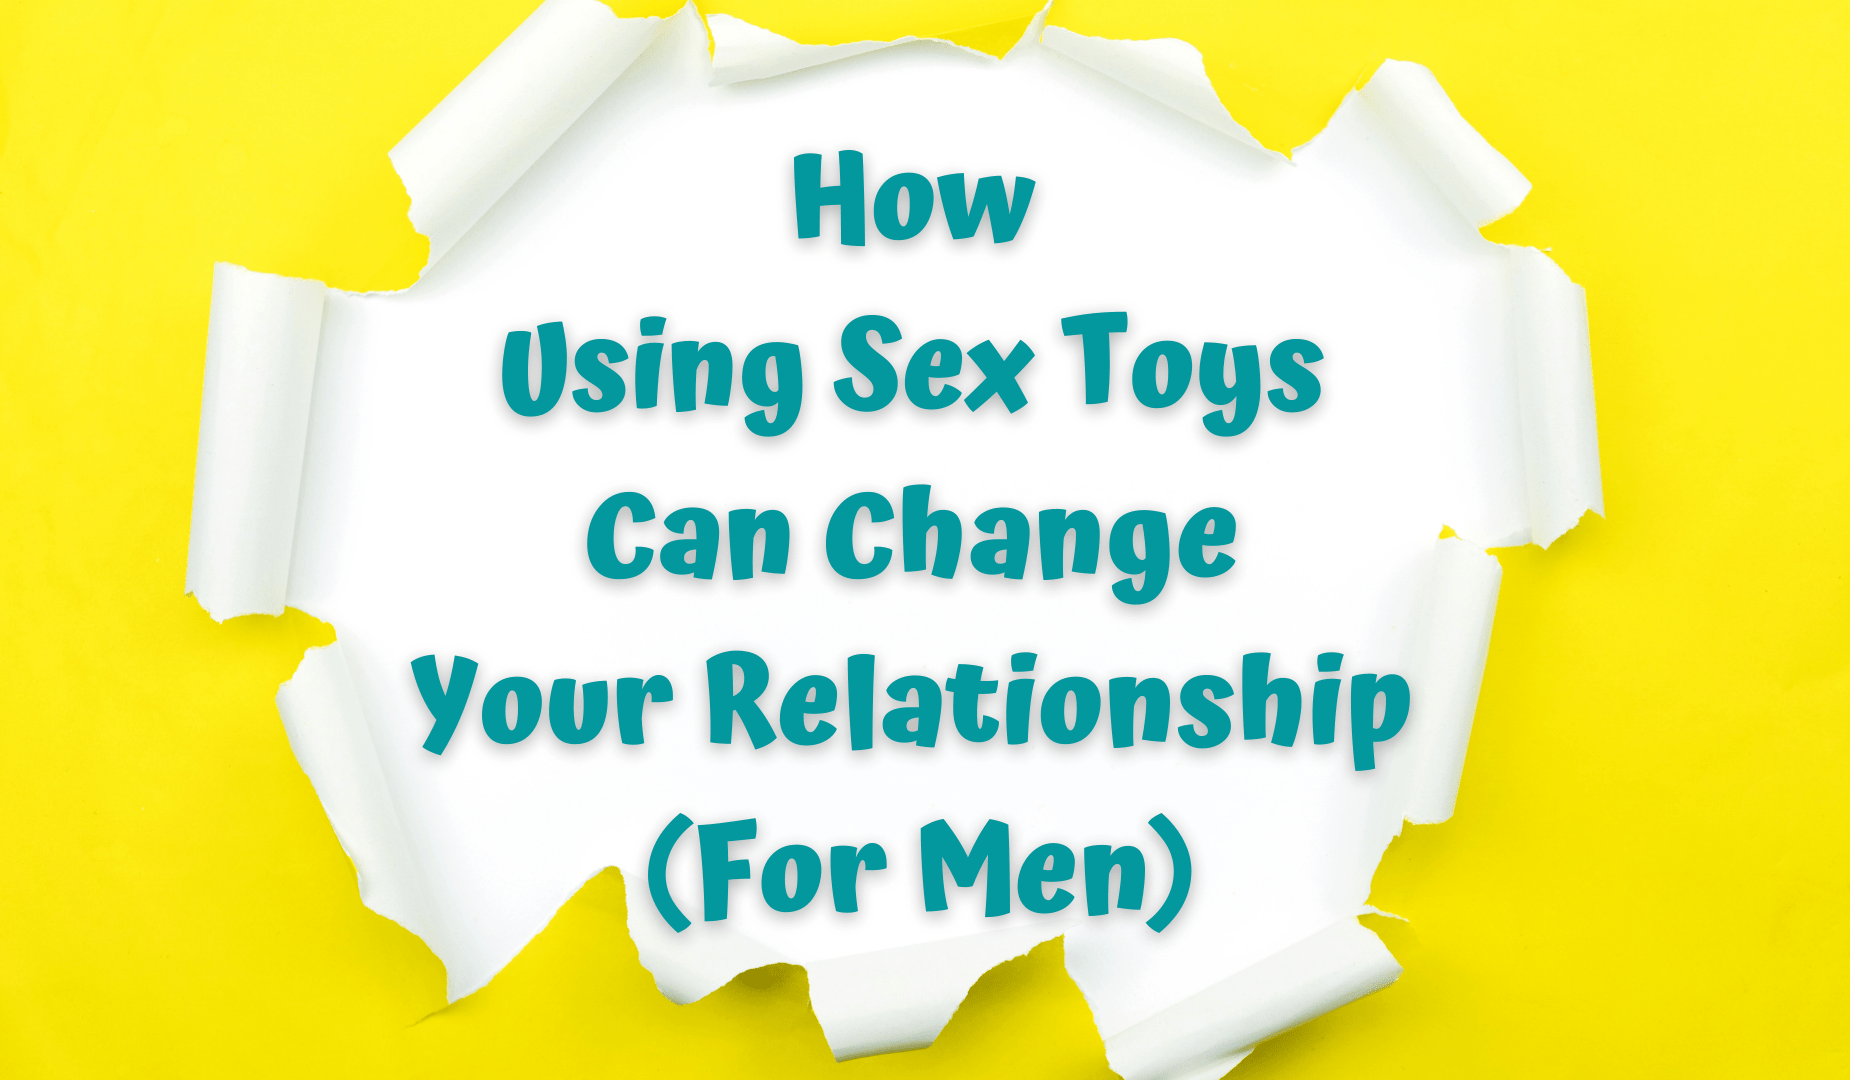 How Using Sex Toys Can Change Your Relationship (For Men)